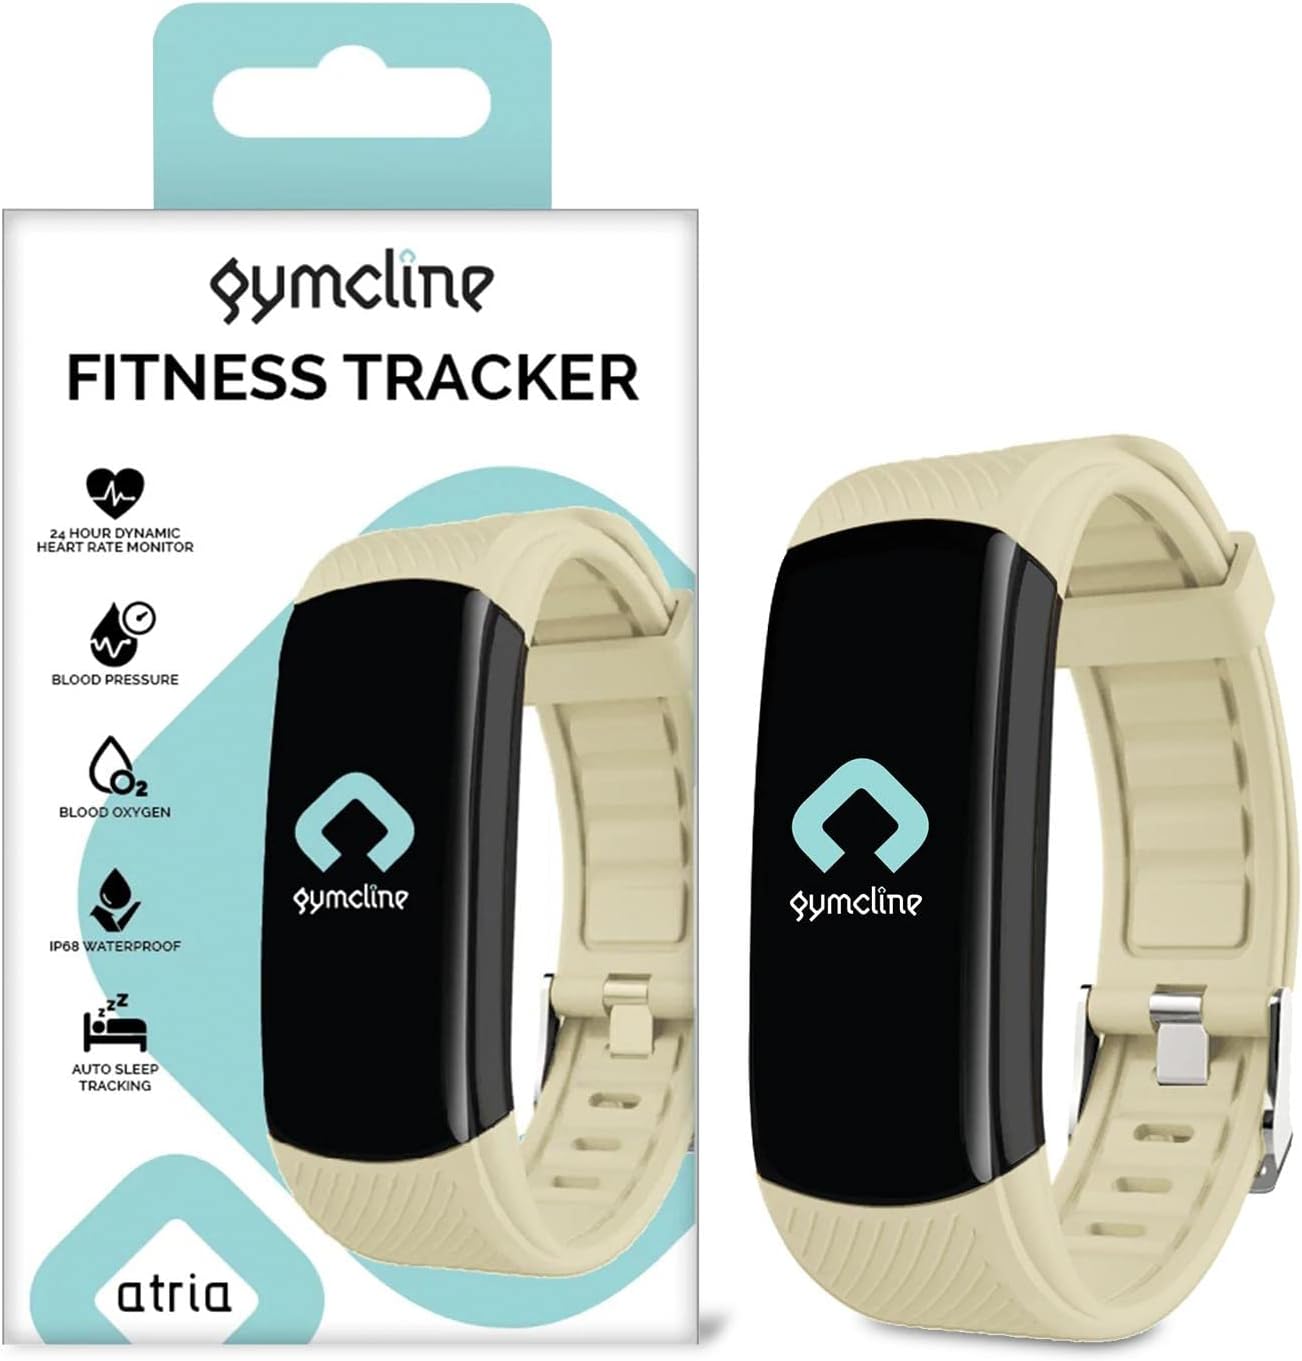 Gymcline Atria Fitness Tracker with 24H Daily Activity Tracking (Cream) RRP £29.99 CLEARANCE XL £14.99